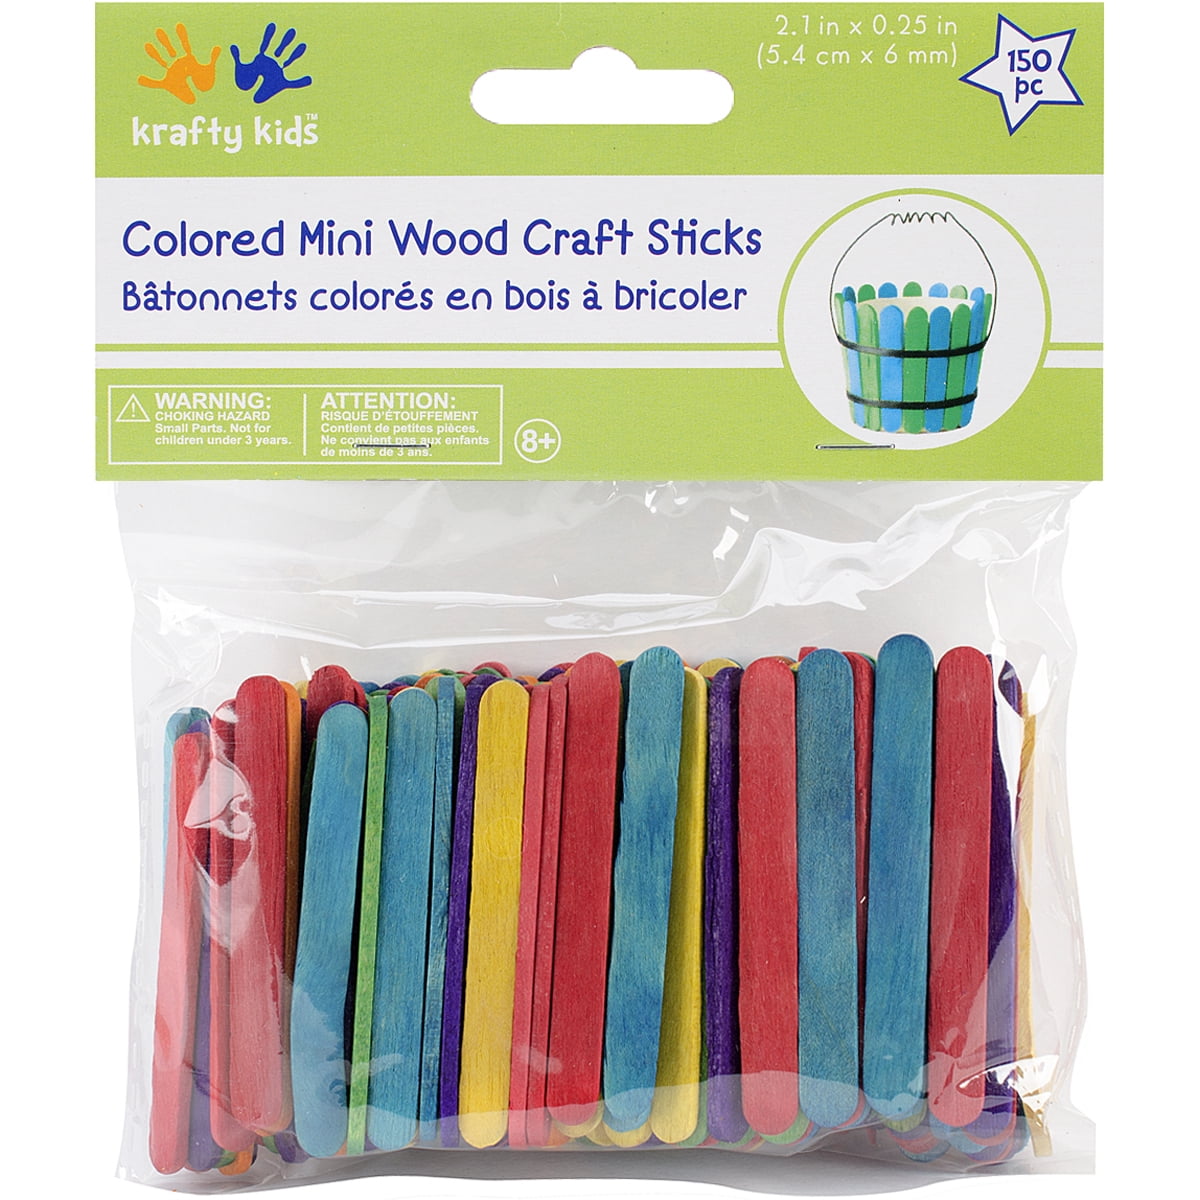 and Colored Mini Craft Sticks 2.6 inches, 120 Pieces 2.13 x 0.25 inches, 150 Pieces Plain 